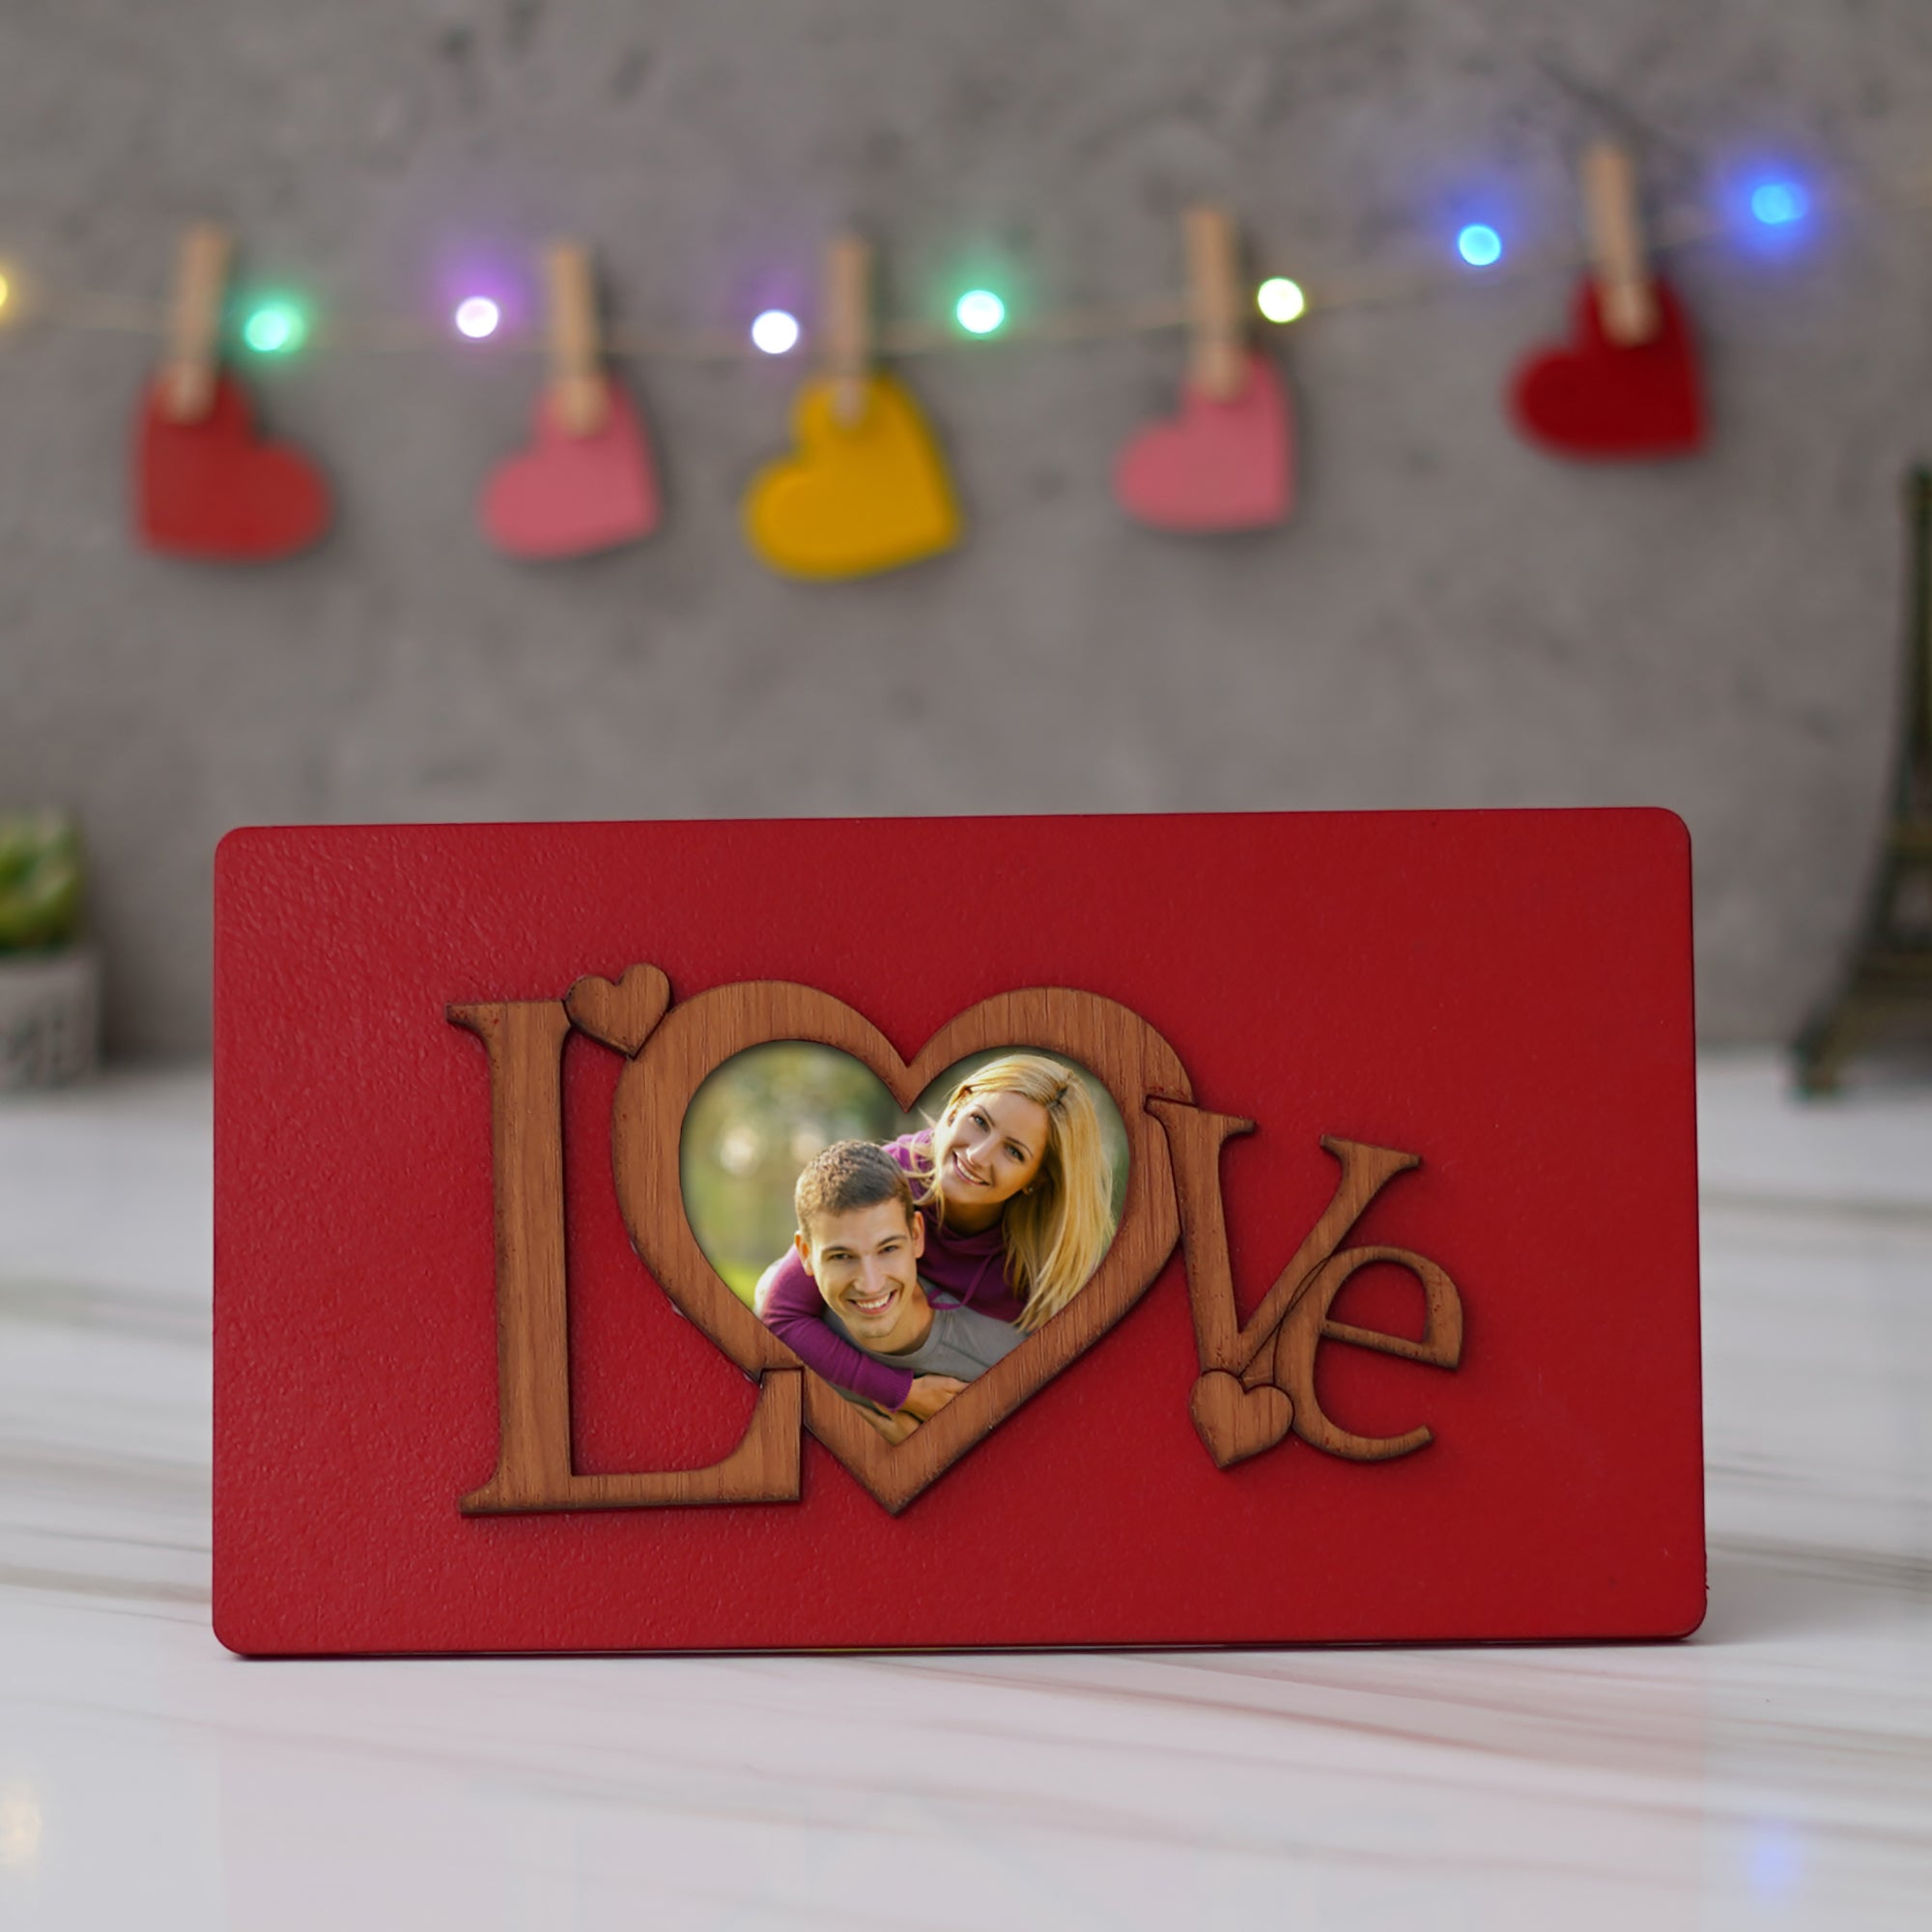 Valentine Combo of Pack of 12 Love Coupons Gift Cards Set, Golden Red Rose Gift Set, "Love" Wooden Photo Frame With Red Stand, Bride Kissing Groom Romantic Polyresin Decorative Showpiece 5